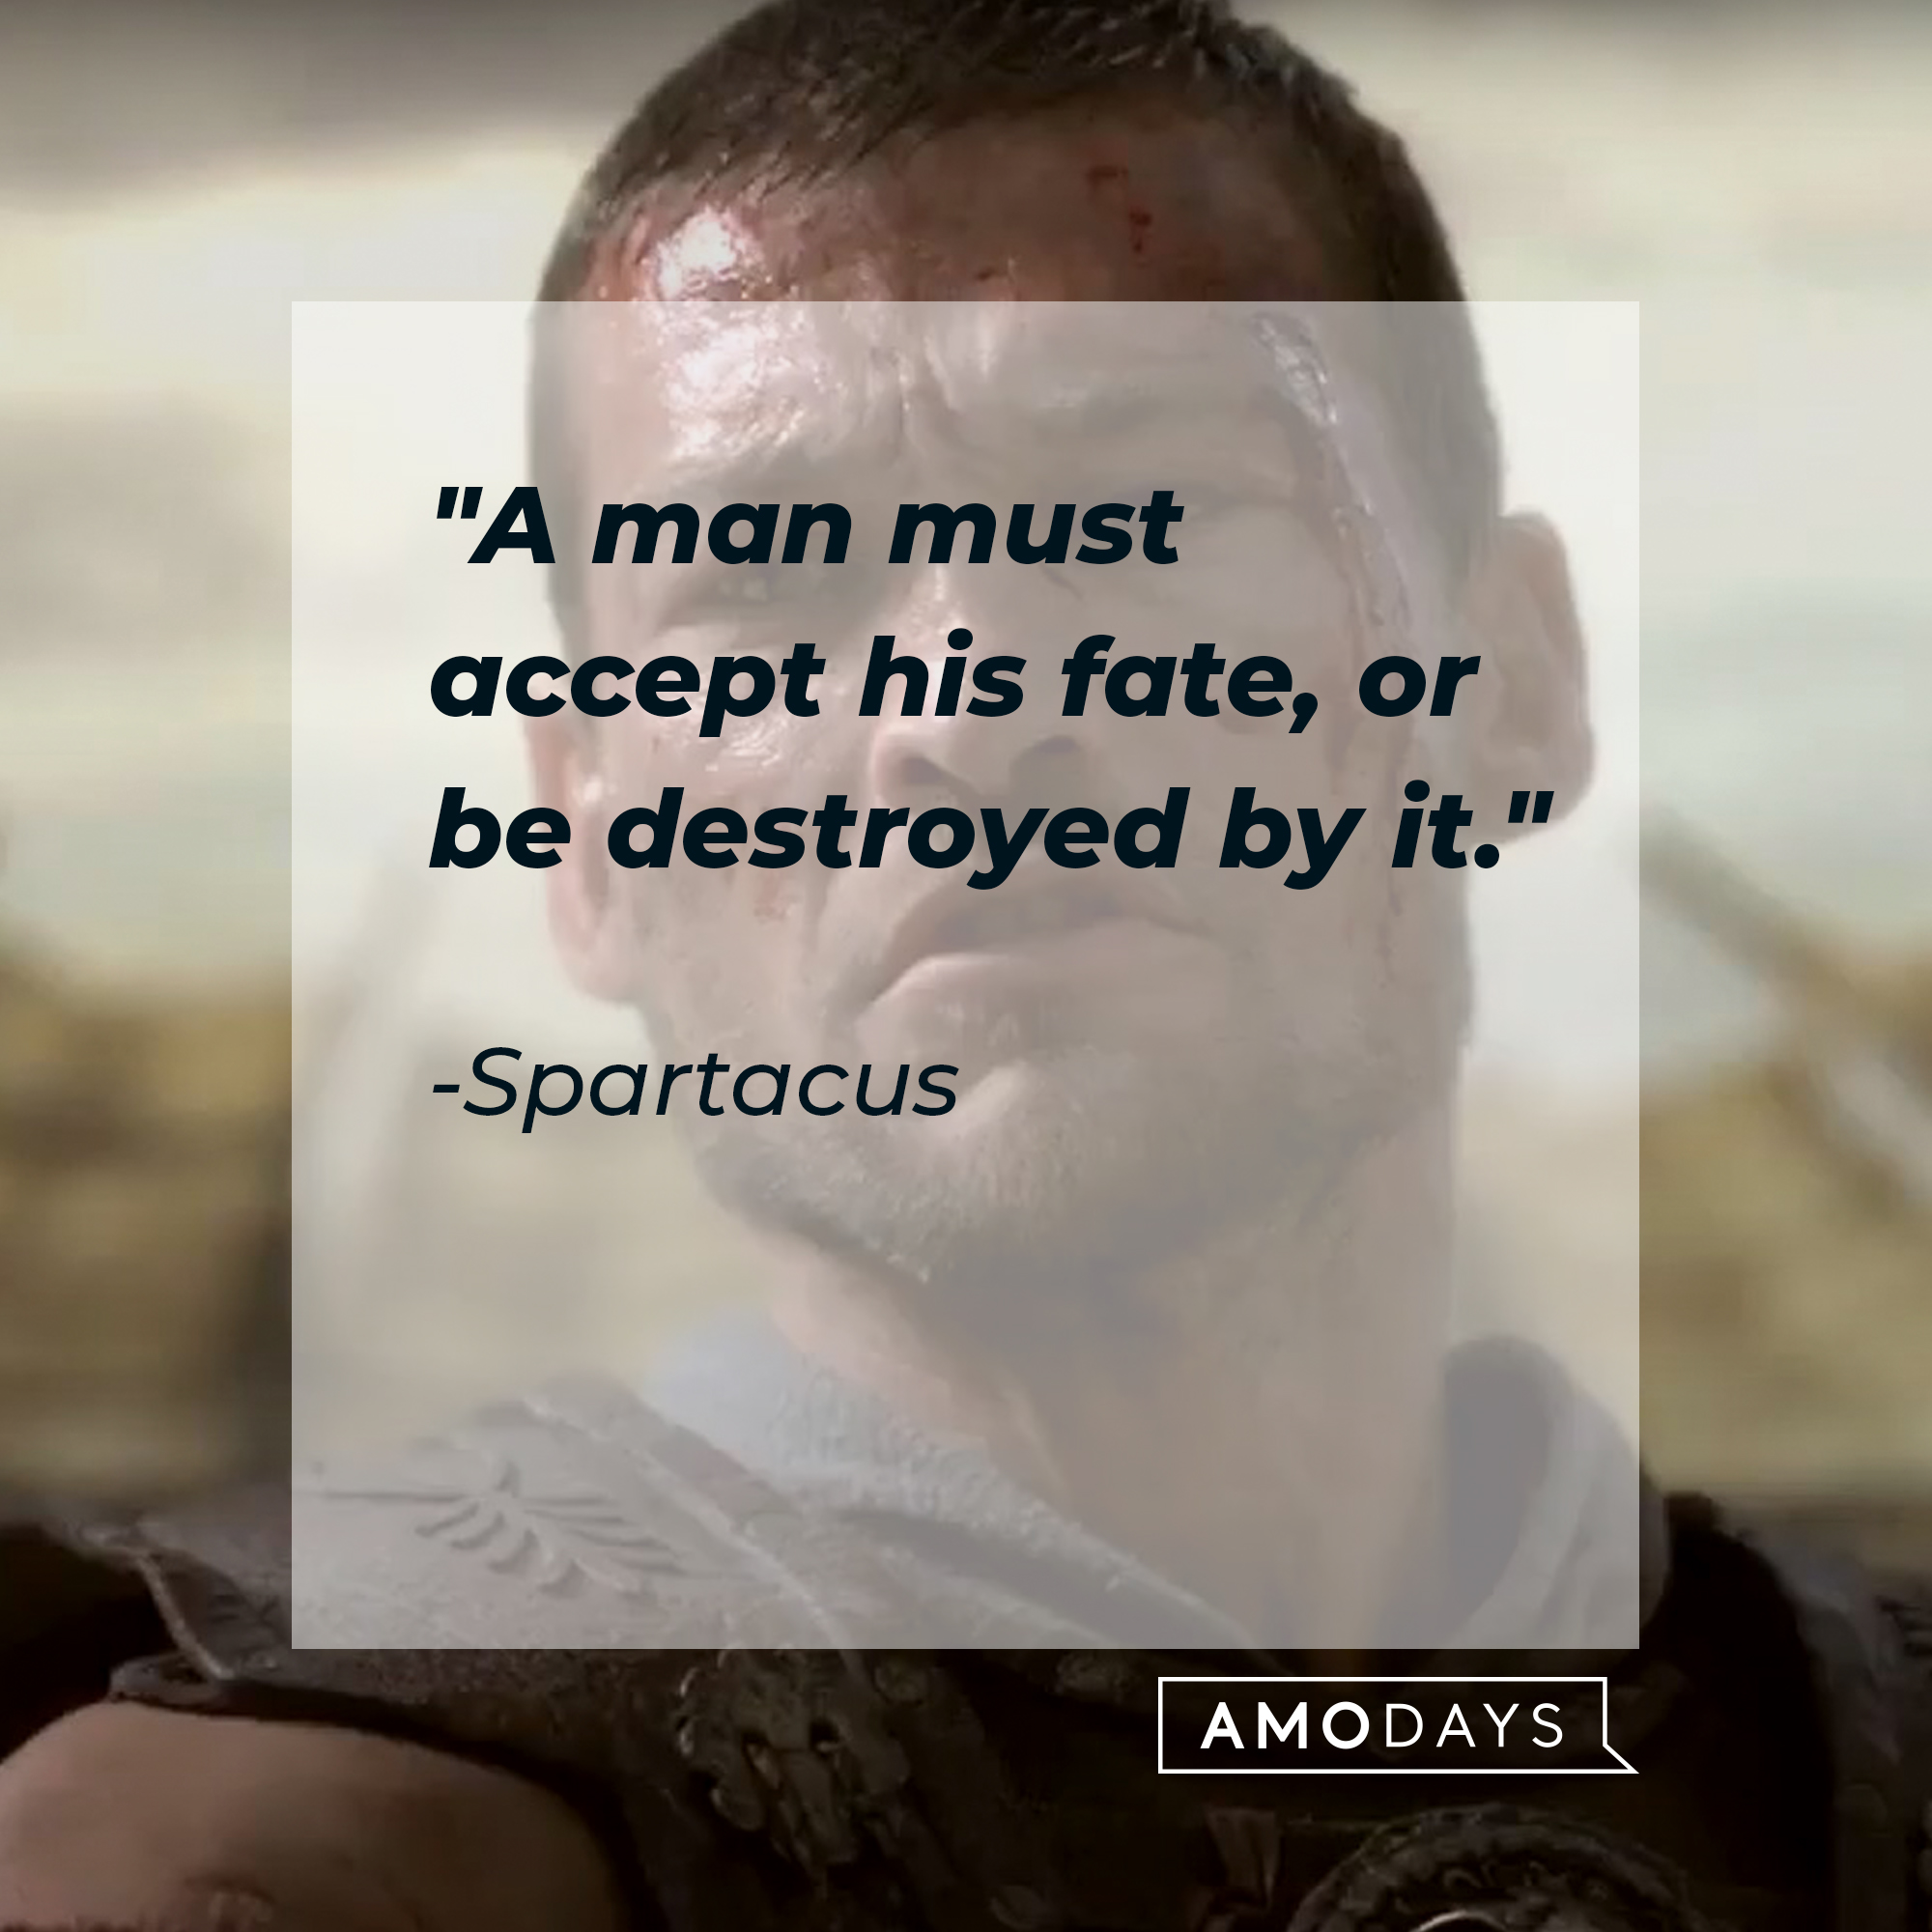 An image of the character Spartacus with his quote: "A man must accept his fate, or be destroyed by it." |Source: youtube.com/Starz